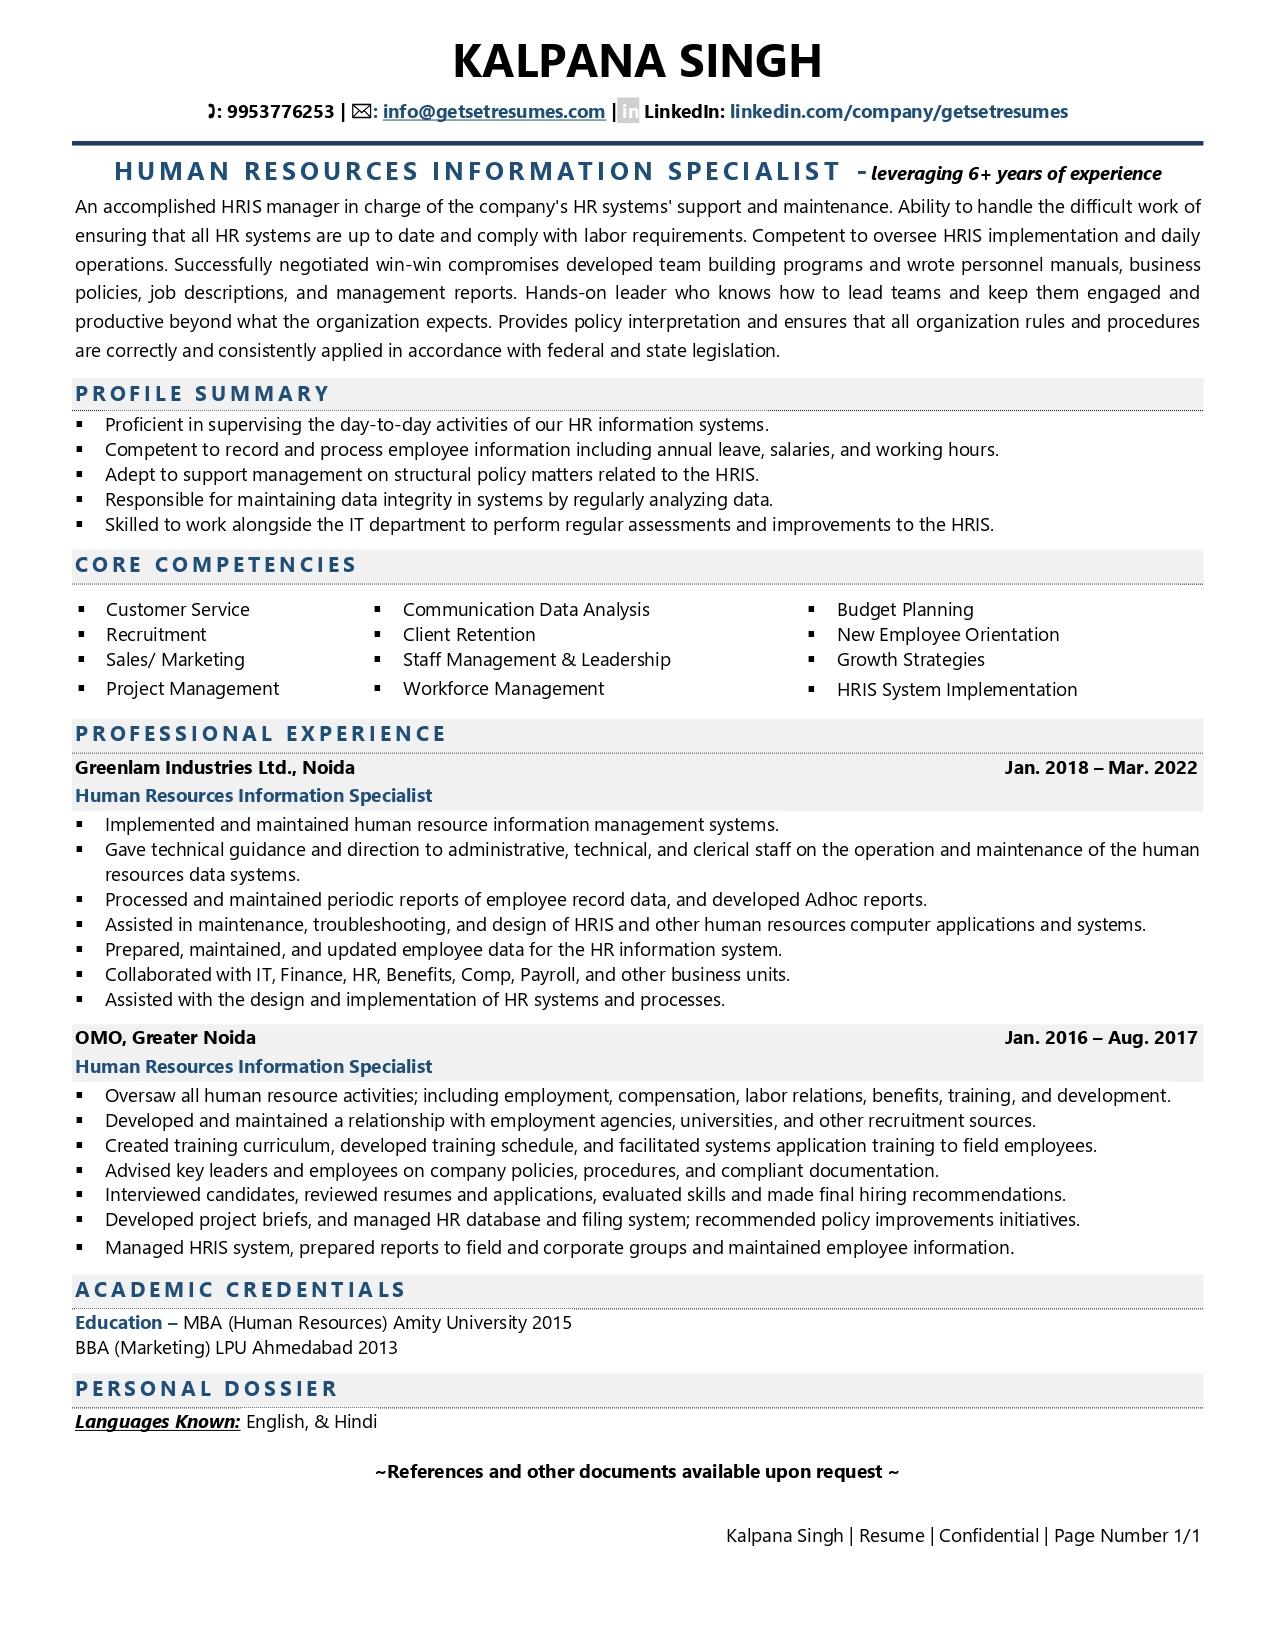 Human Resource Information Specialist - Resume Example & Template